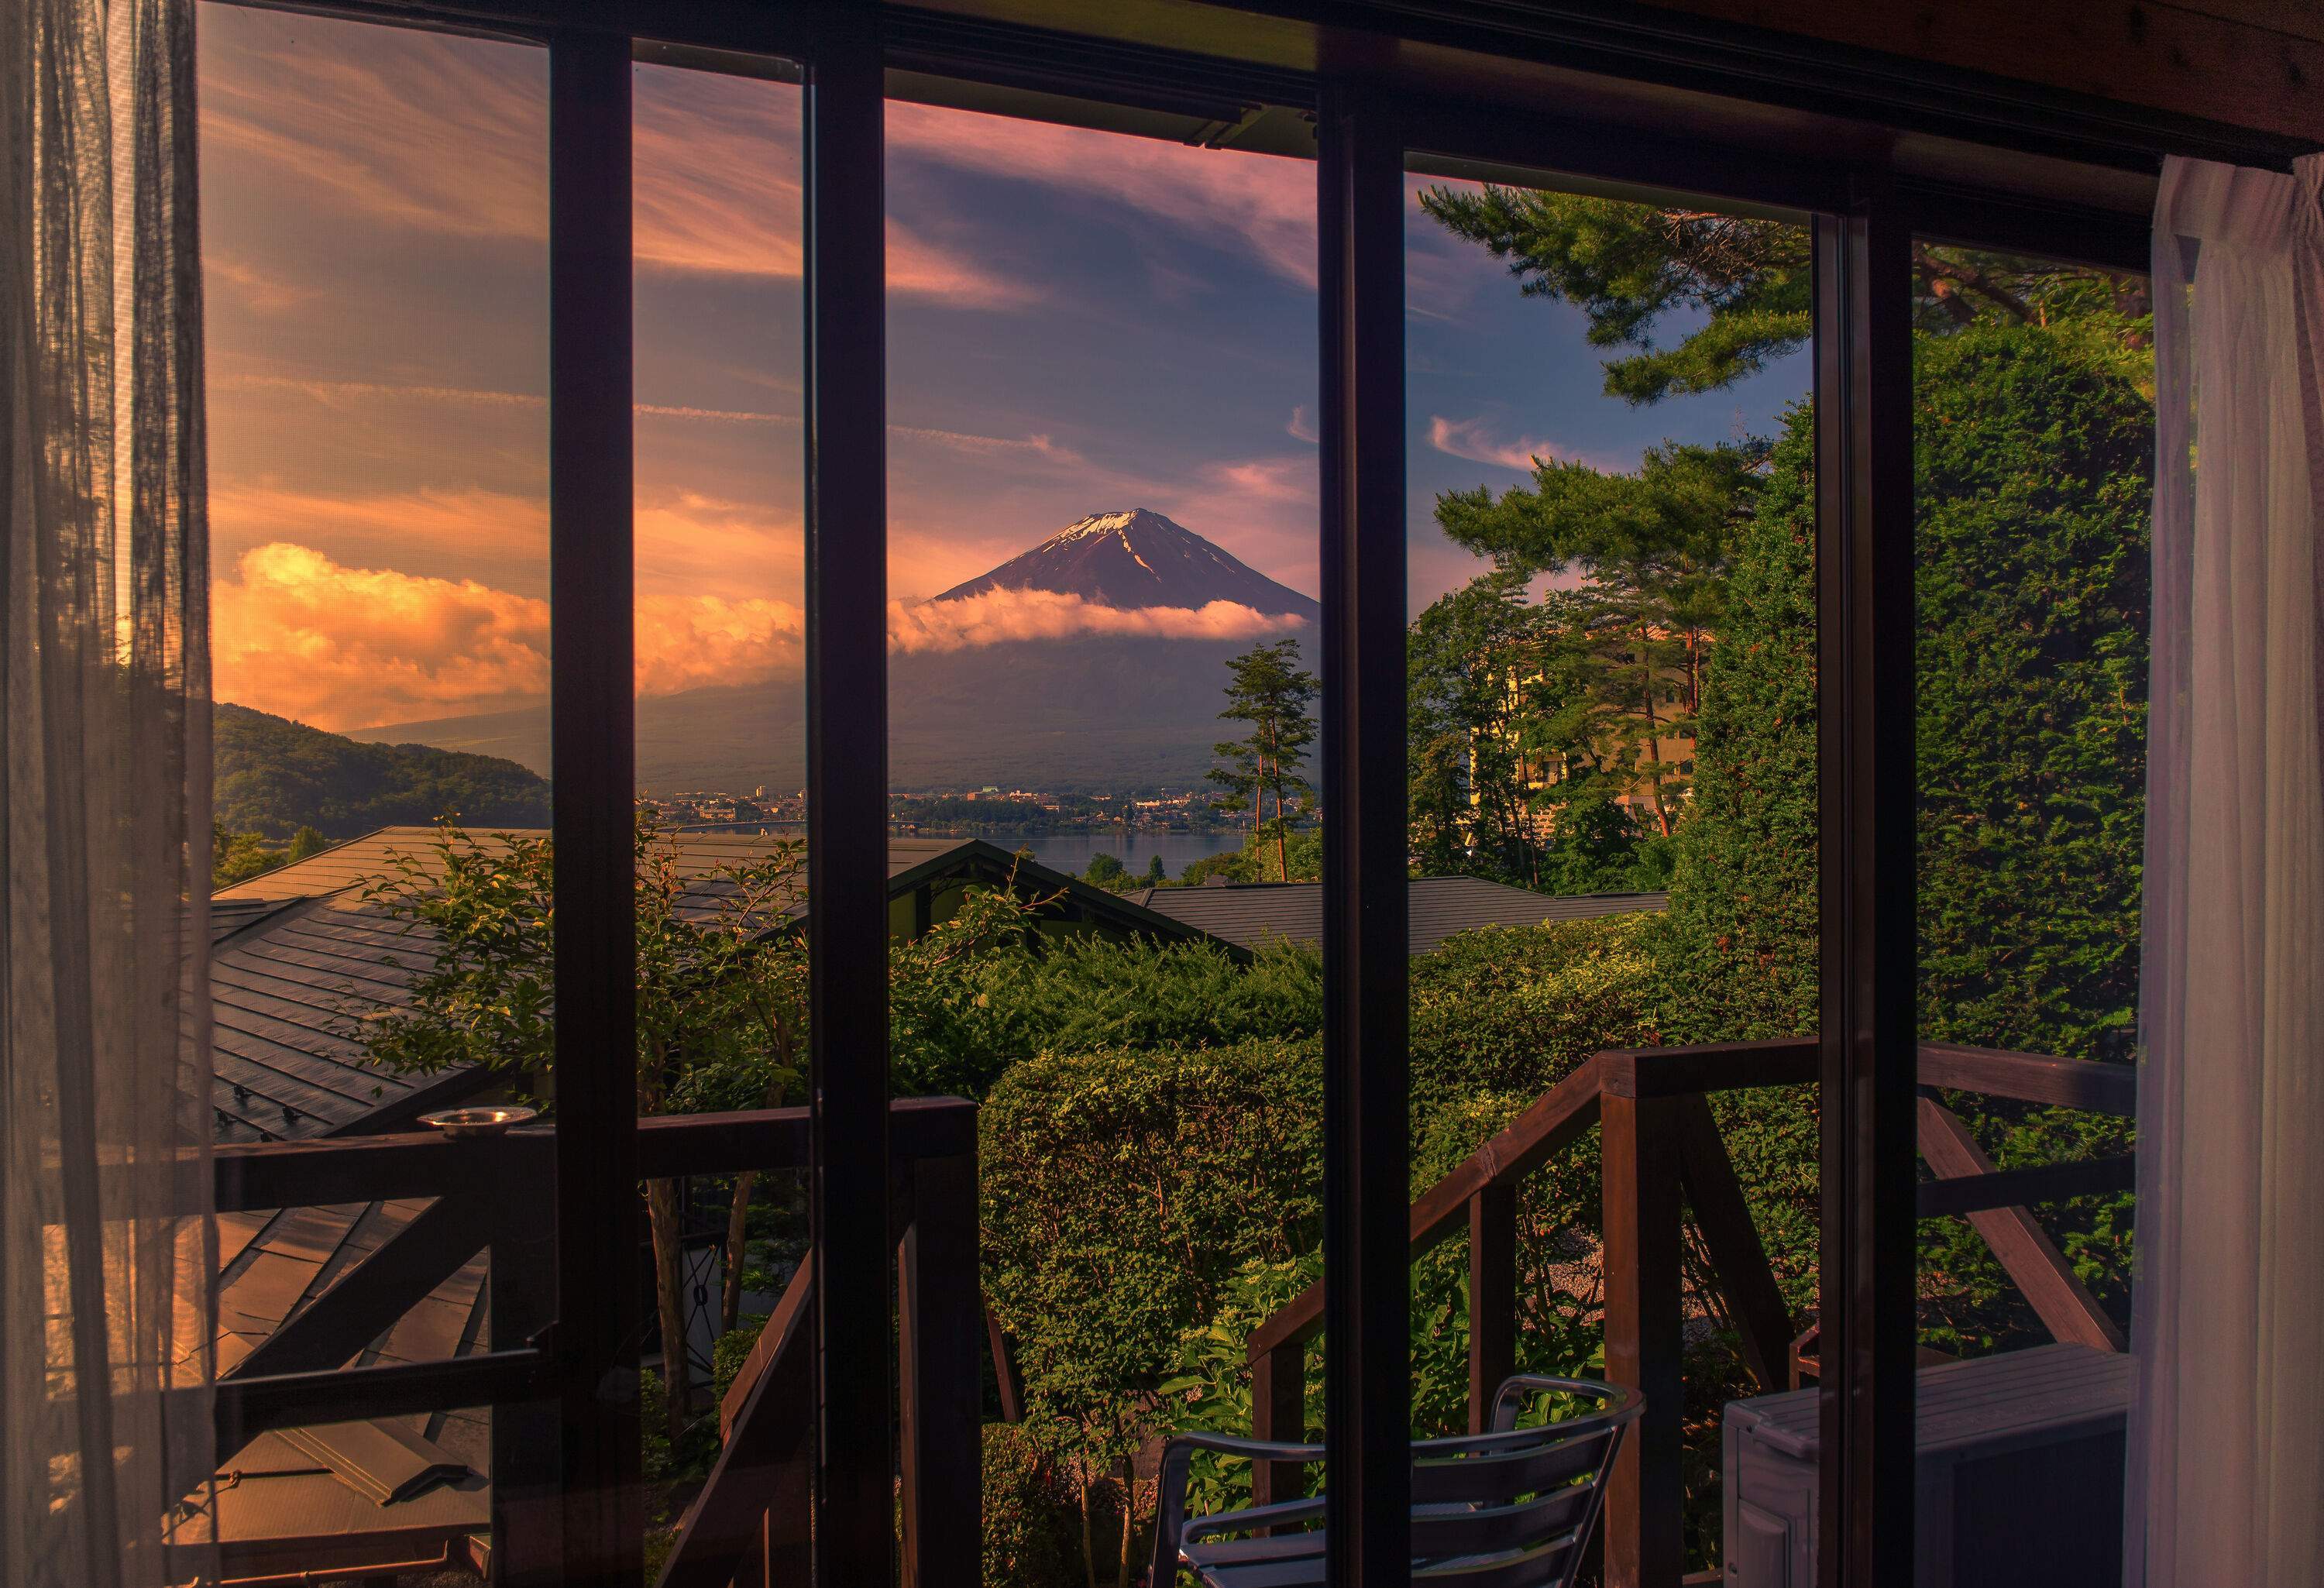 Peaceful scenery of Mount Fuji against the scenic twilight sky seen from a room's window.